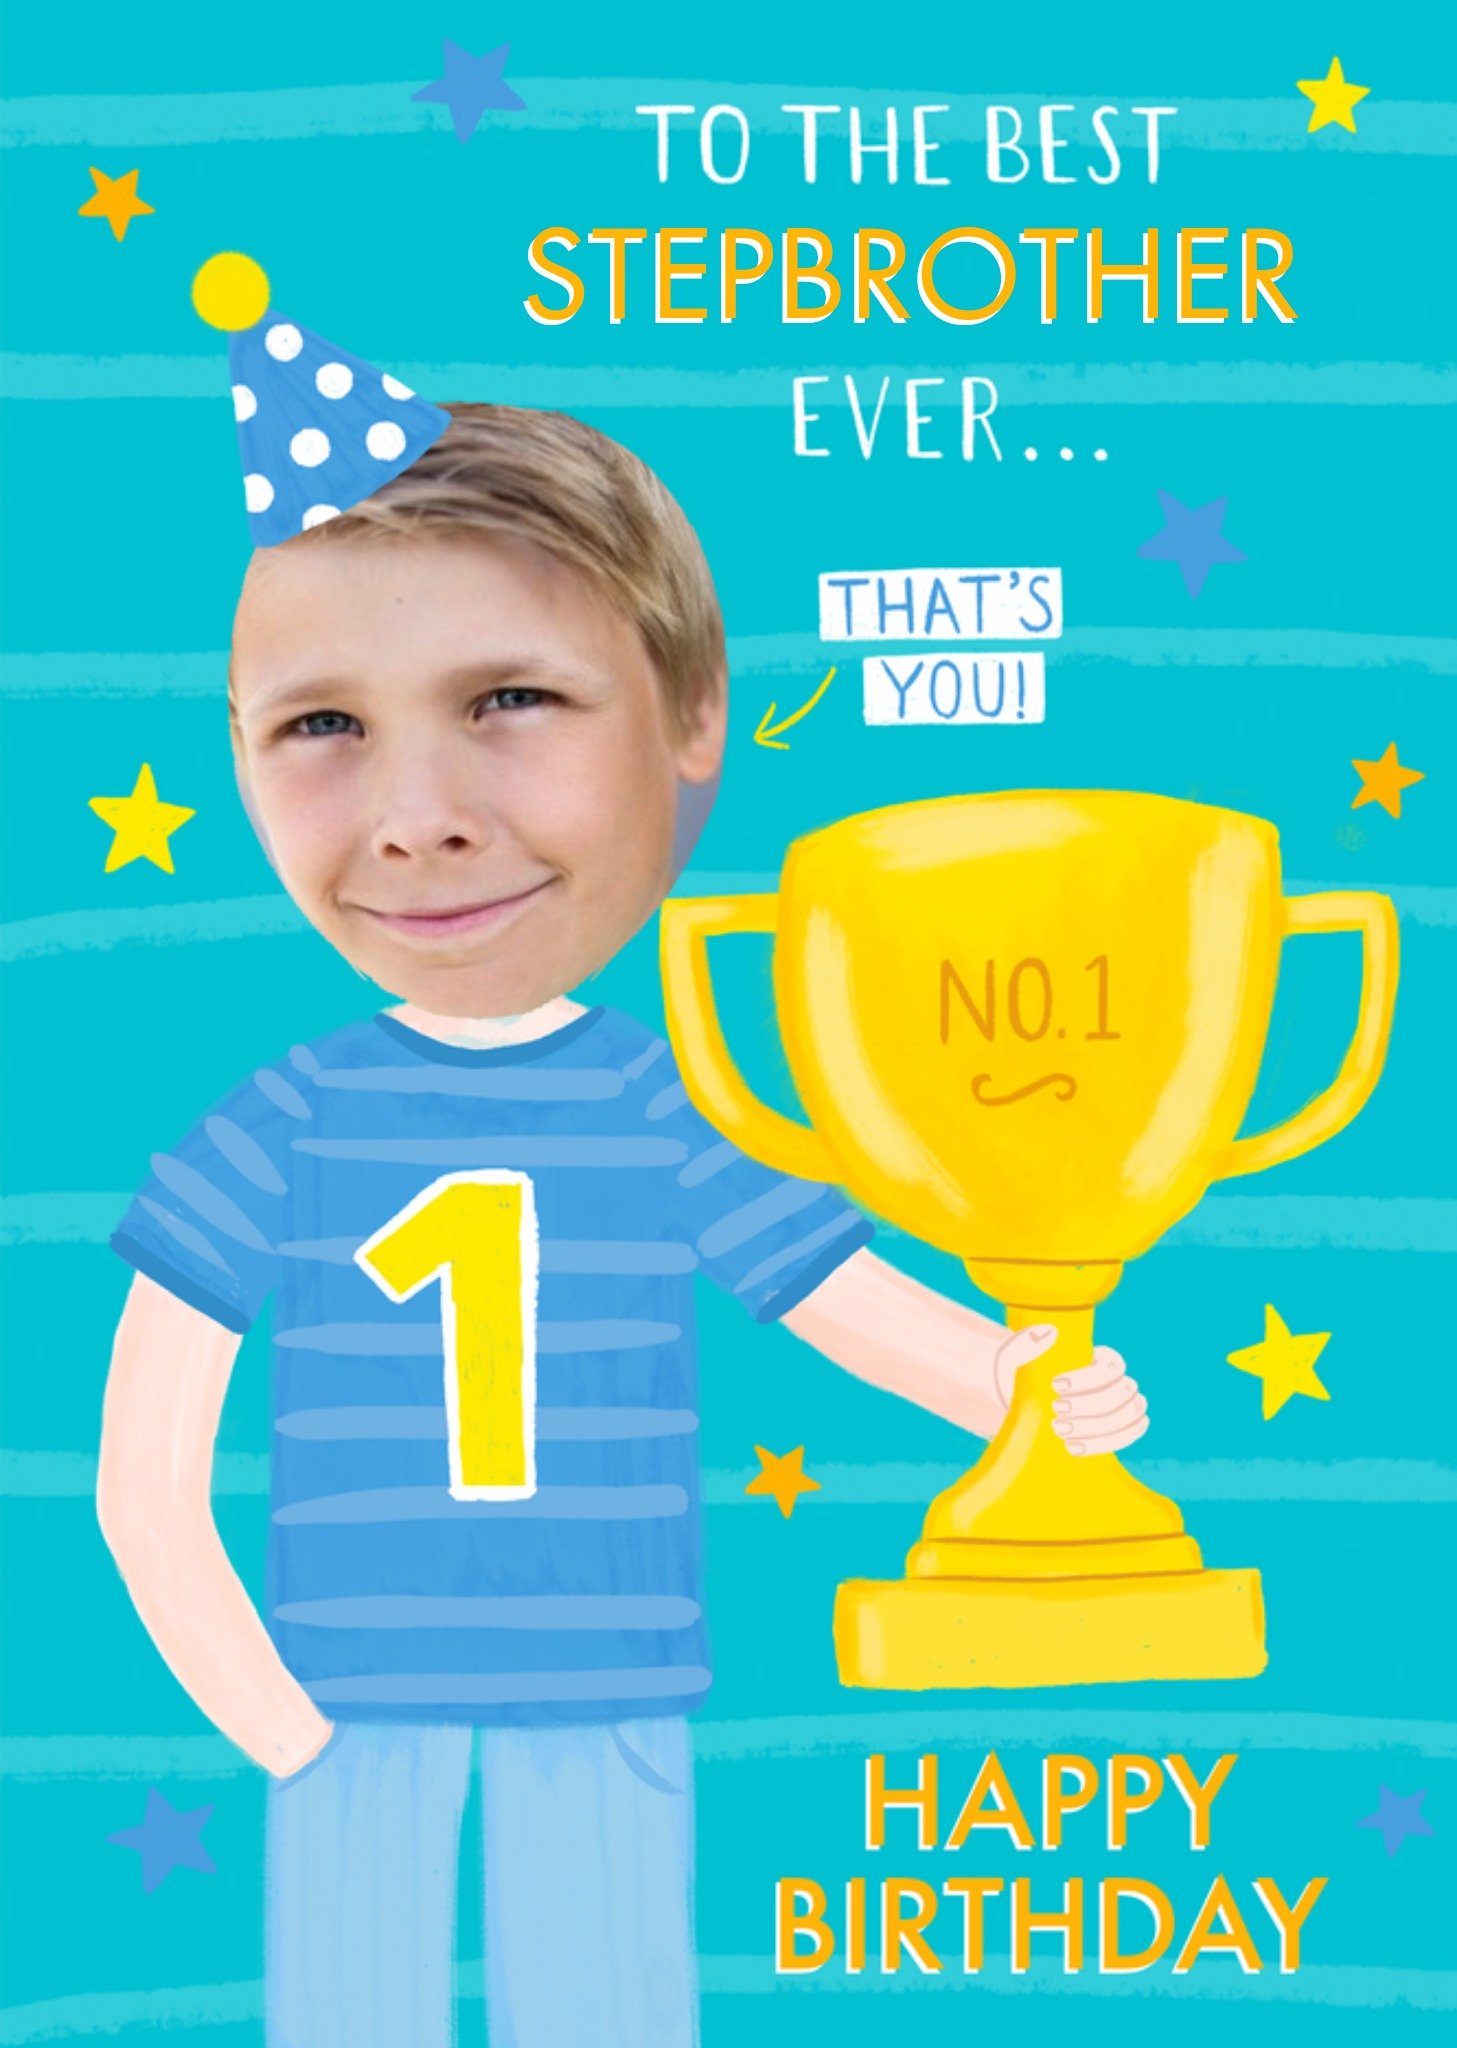 Moonpig Illustrated Photo Upload Character Holding Number 1 Trophy Stepbrother Birthday Card Ecard